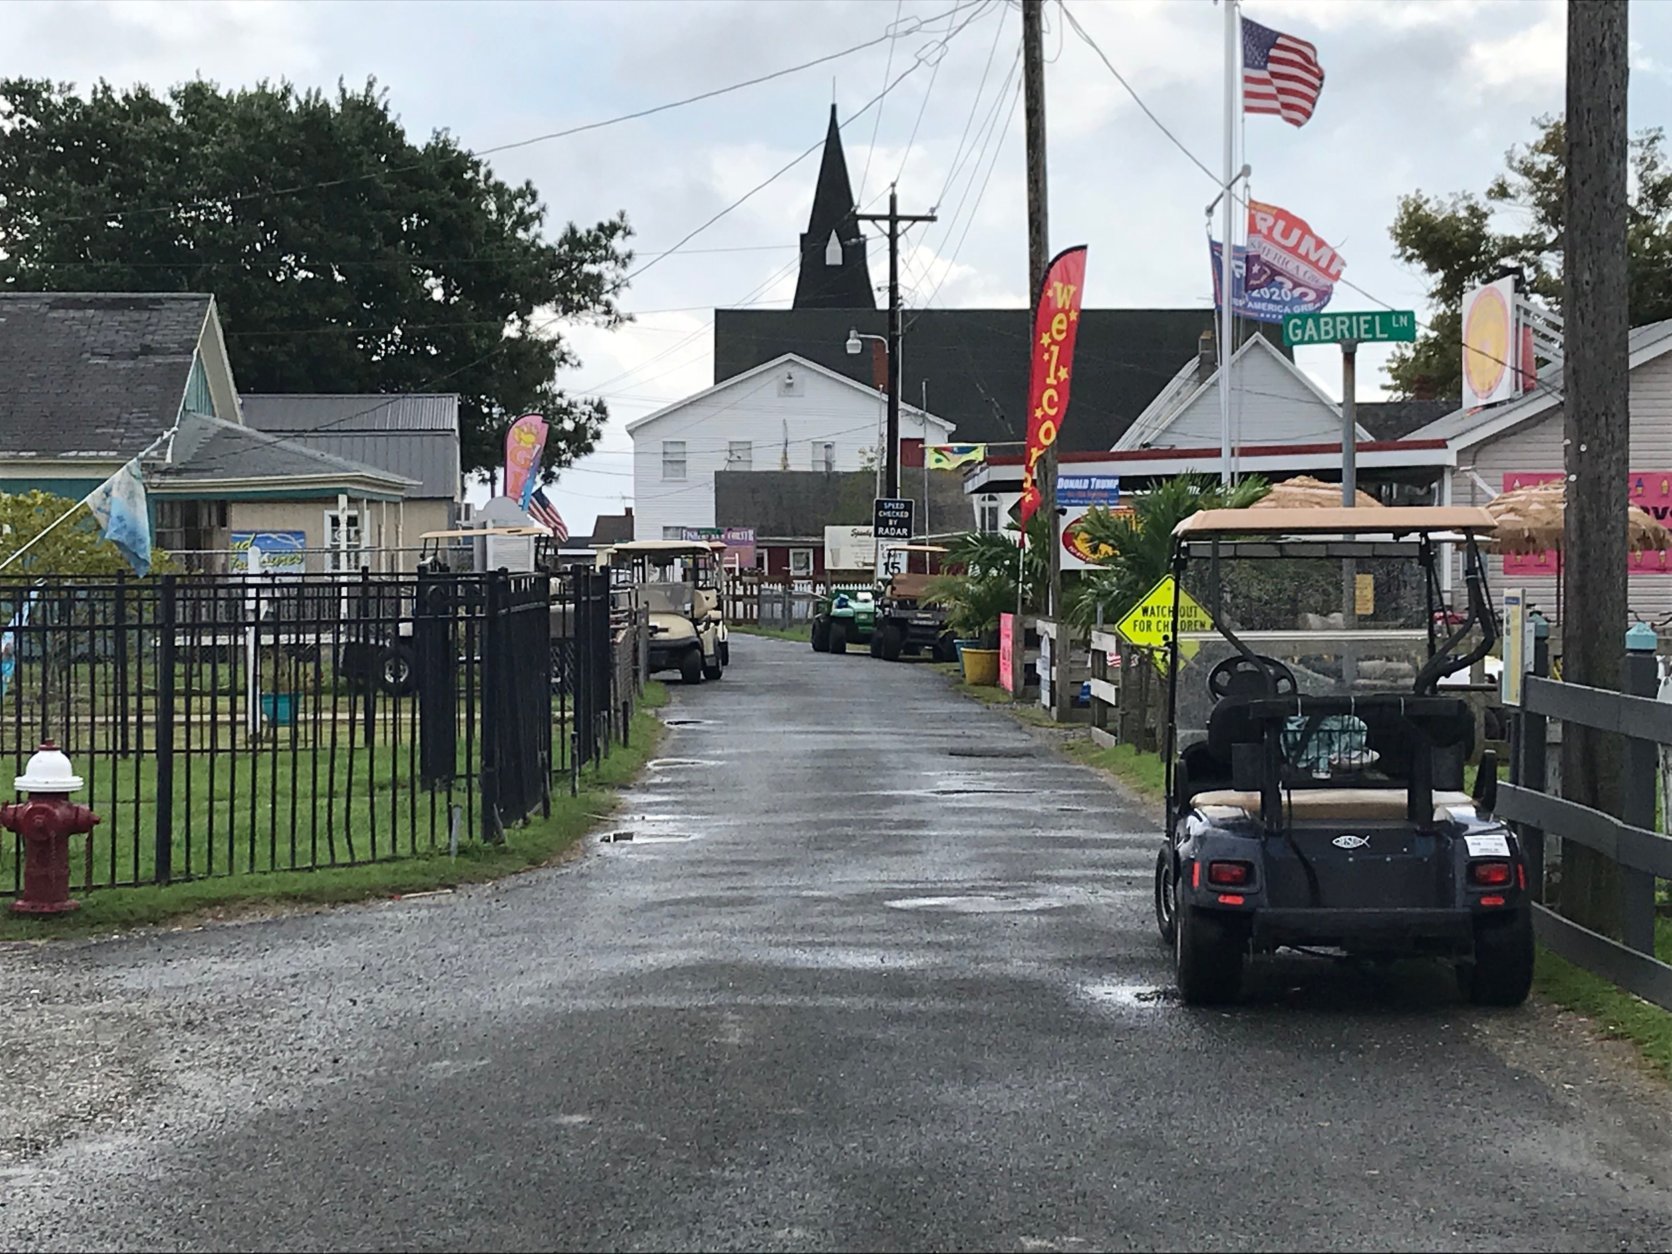 Golf carts and bicycles are the most common form of transportation on Tangier Island’s narrow streets. There are few cars. (WTOP/Michelle Basch)